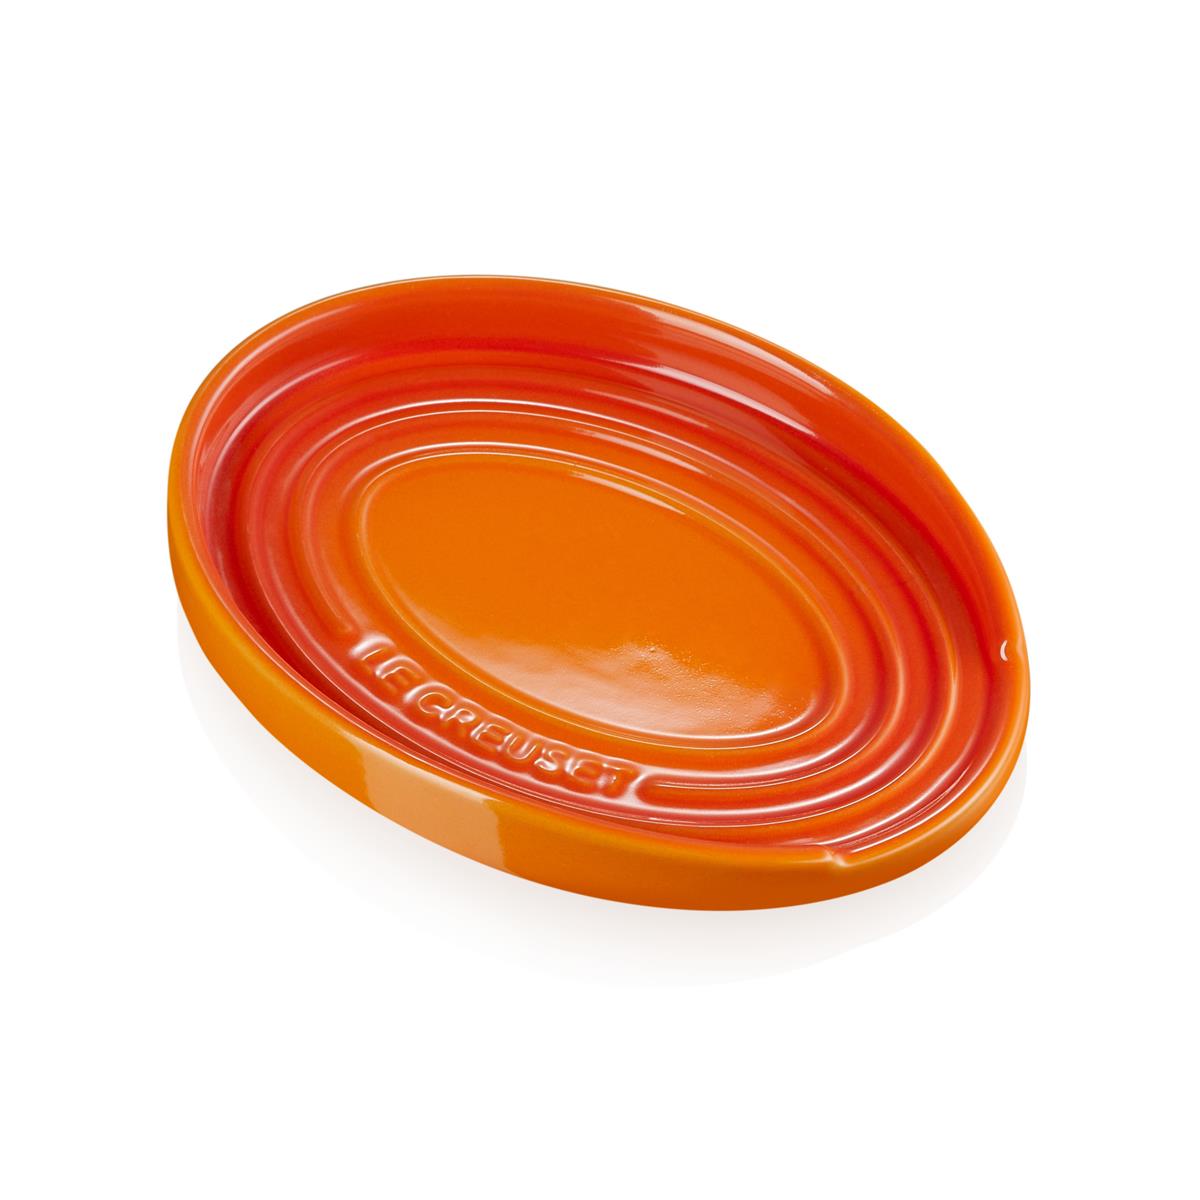 What is the purpose of the le creuset spoon rest in cooking?